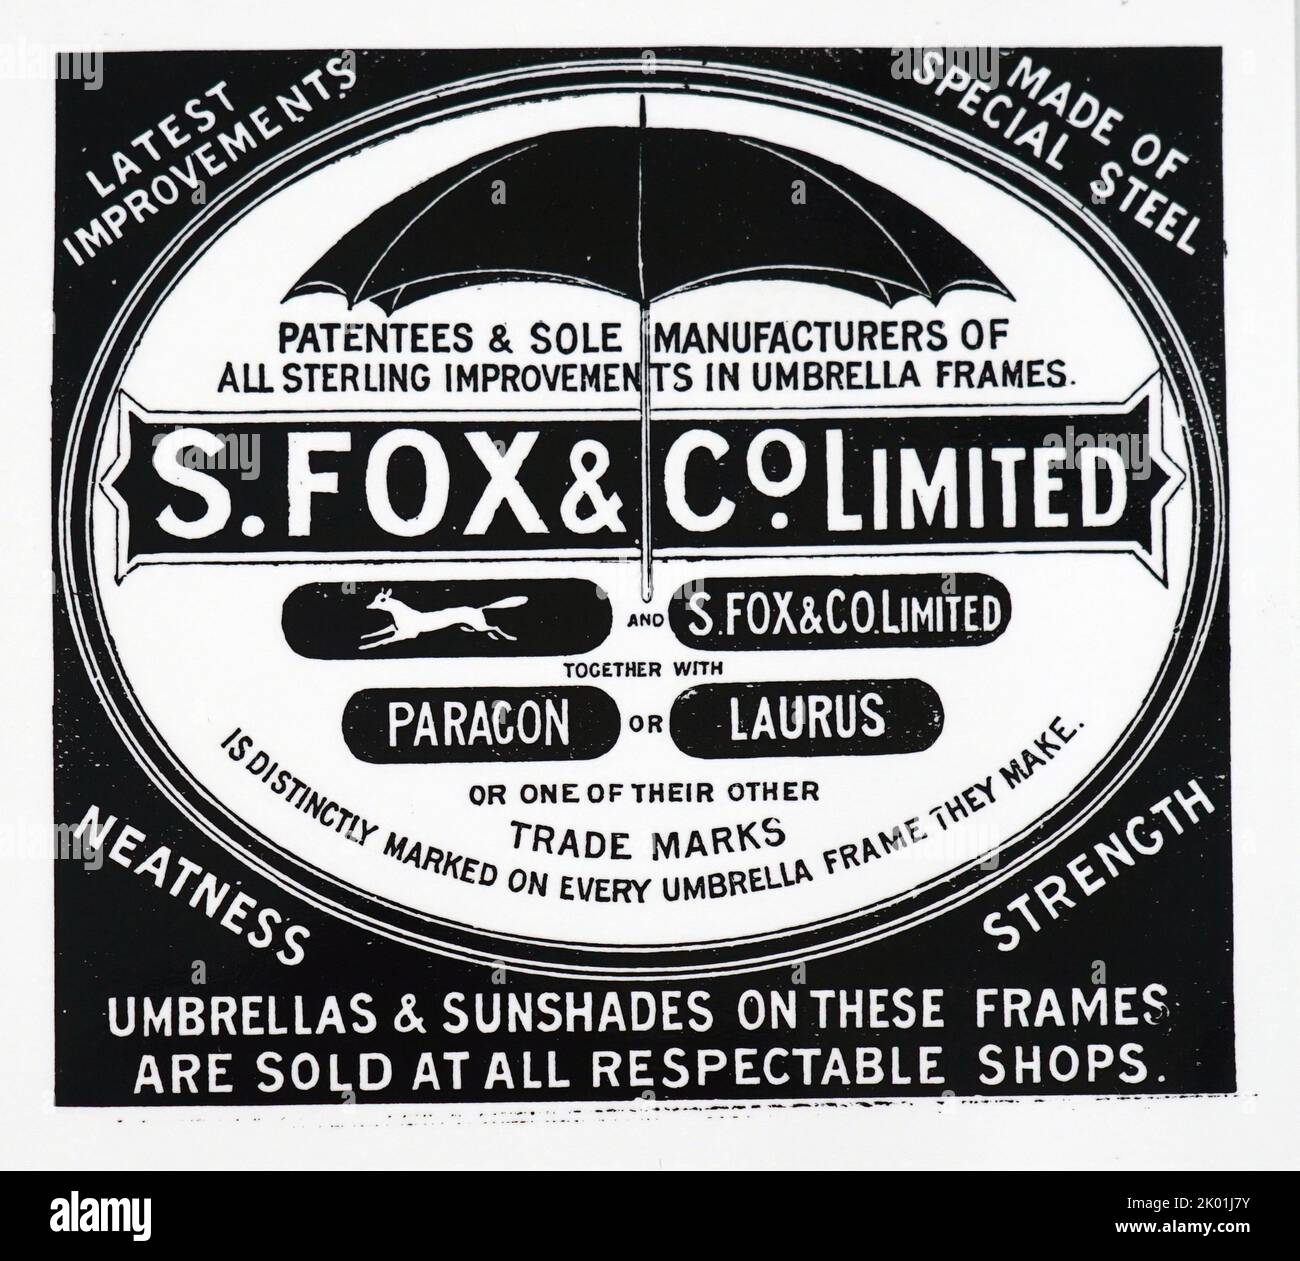 Advertisement for Fox's umbrella frames. Before the introduction of metal spokes, whalebone was used. From The Illustrated London News, 23 December 1893. Stock Photo